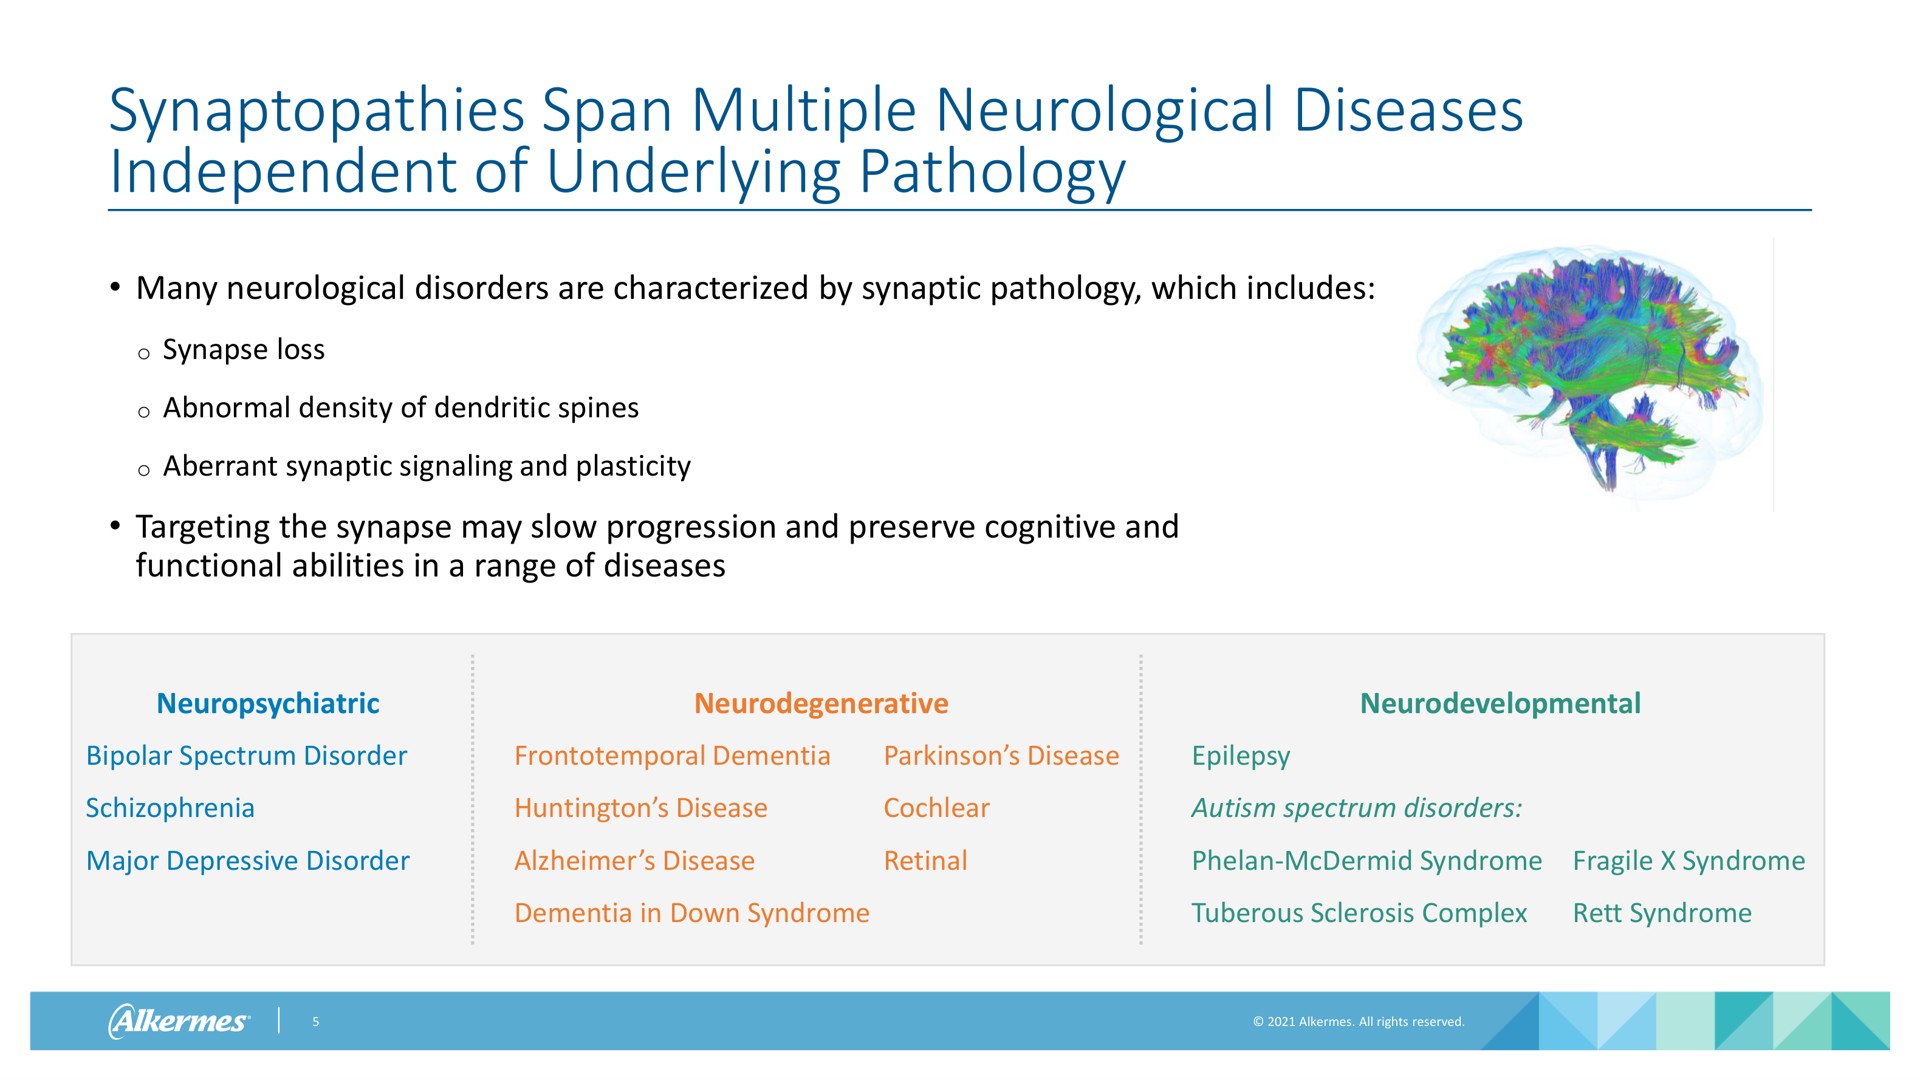 span multiple neurological diseases independent of underlying pathology many neurological disorders are characterized by synaptic pathology which includes synapse loss abnormal density of dendritic spines aberrant synaptic signaling and plasticity targeting the synapse may slow progression and preserve cognitive and functional abilities in a range of diseases neuropsychiatric neurodegenerative bipolar spectrum disorder frontotemporal dementia disease epilepsy schizophrenia disease major depressive disorder disease cochlear retinal autism spectrum disorders syndrome fragile syndrome dementia in down syndrome tuberous sclerosis complex syndrome | Alkermes